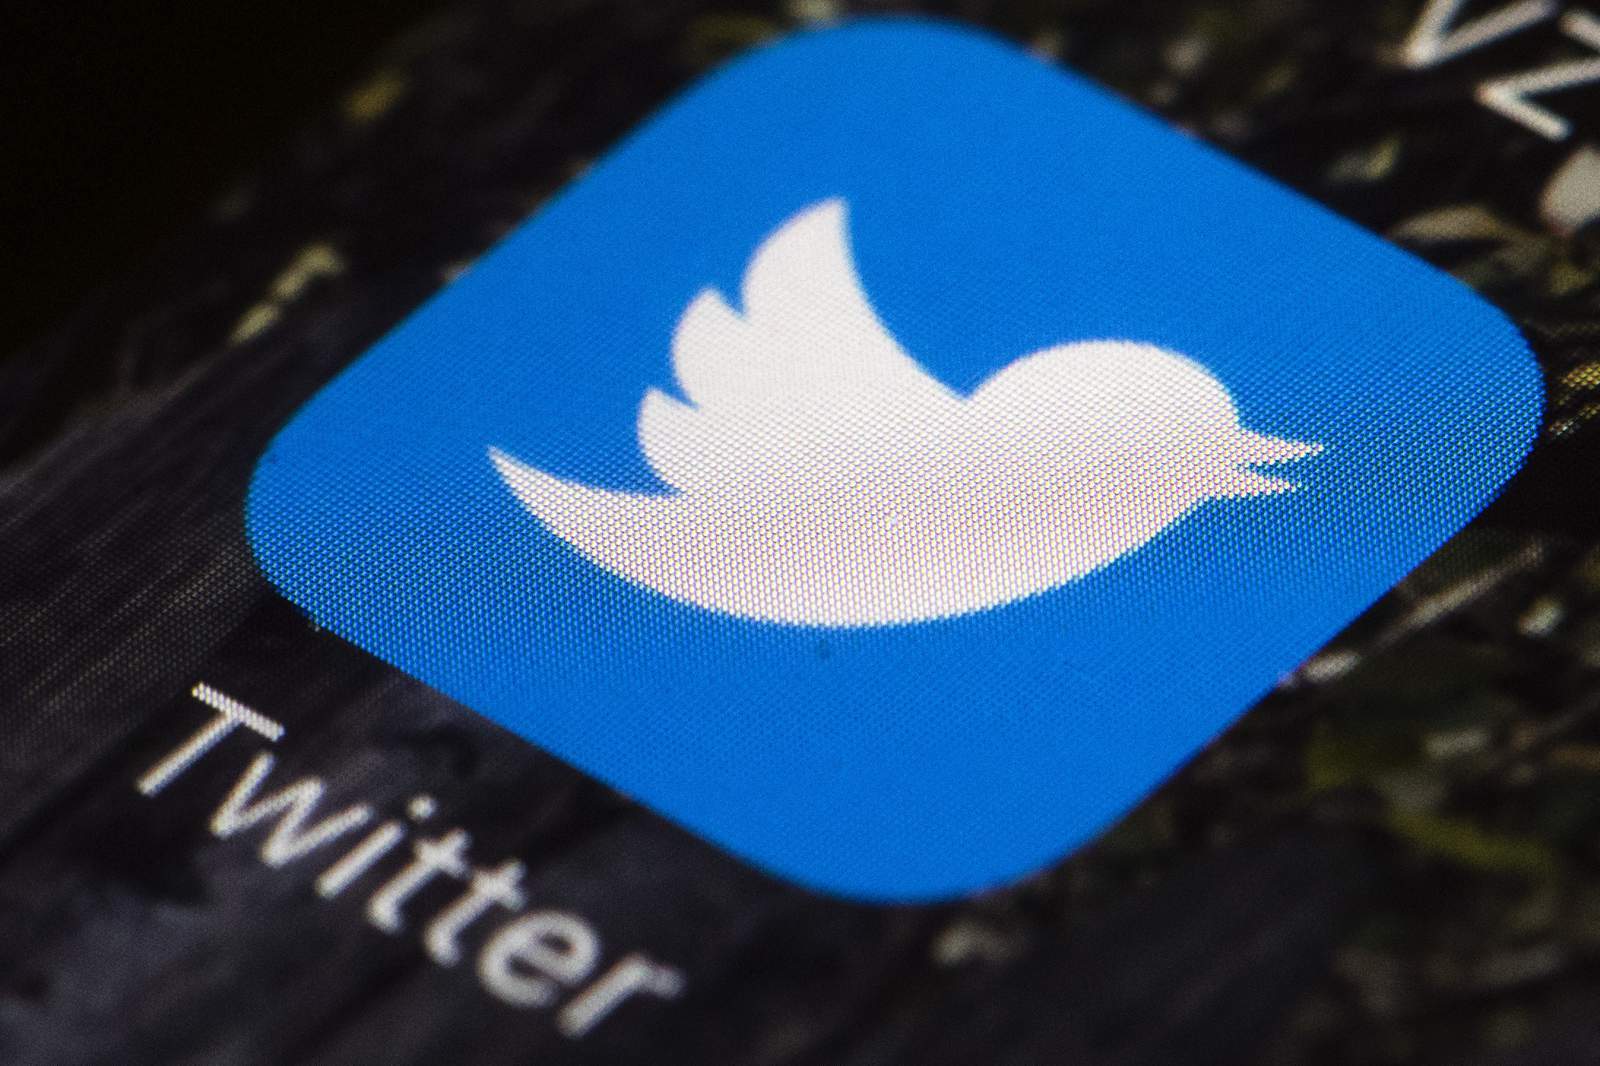 Twitter and JPMorgan are removing ‘master,’ ‘slave’ and ‘blacklist’ from their code